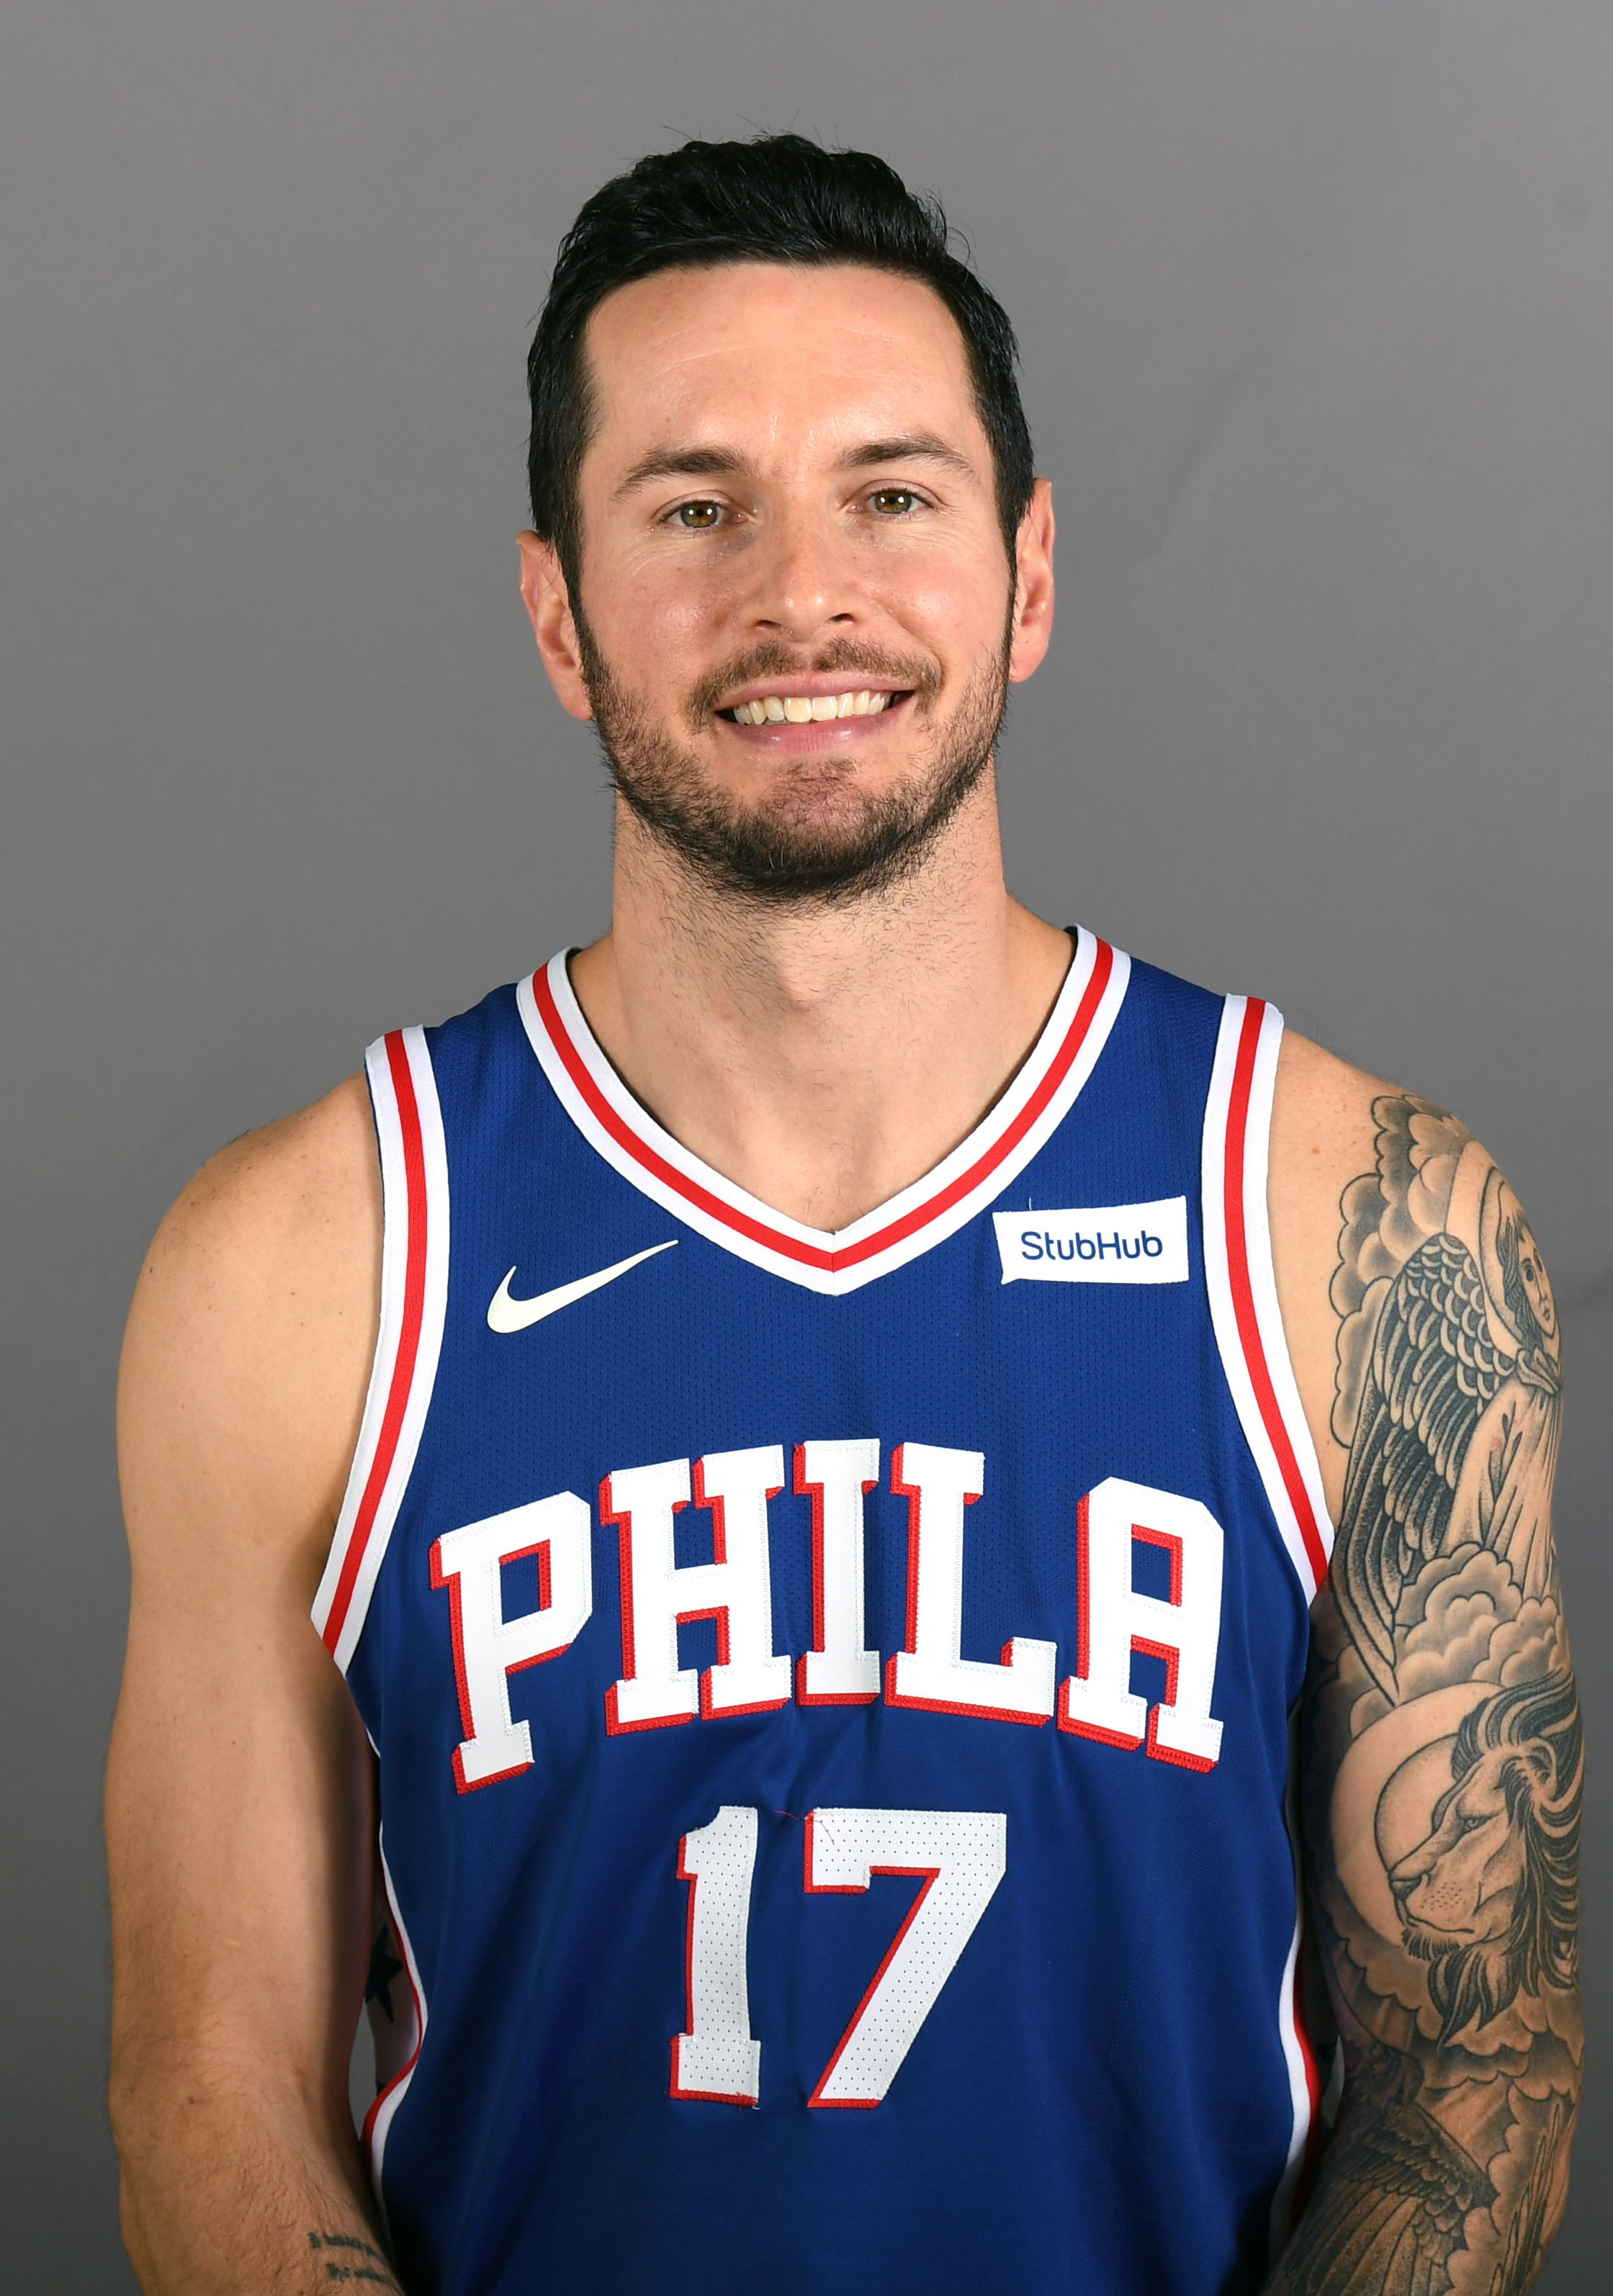 Breaking down JJ Redick's comments about playing for the Sixers